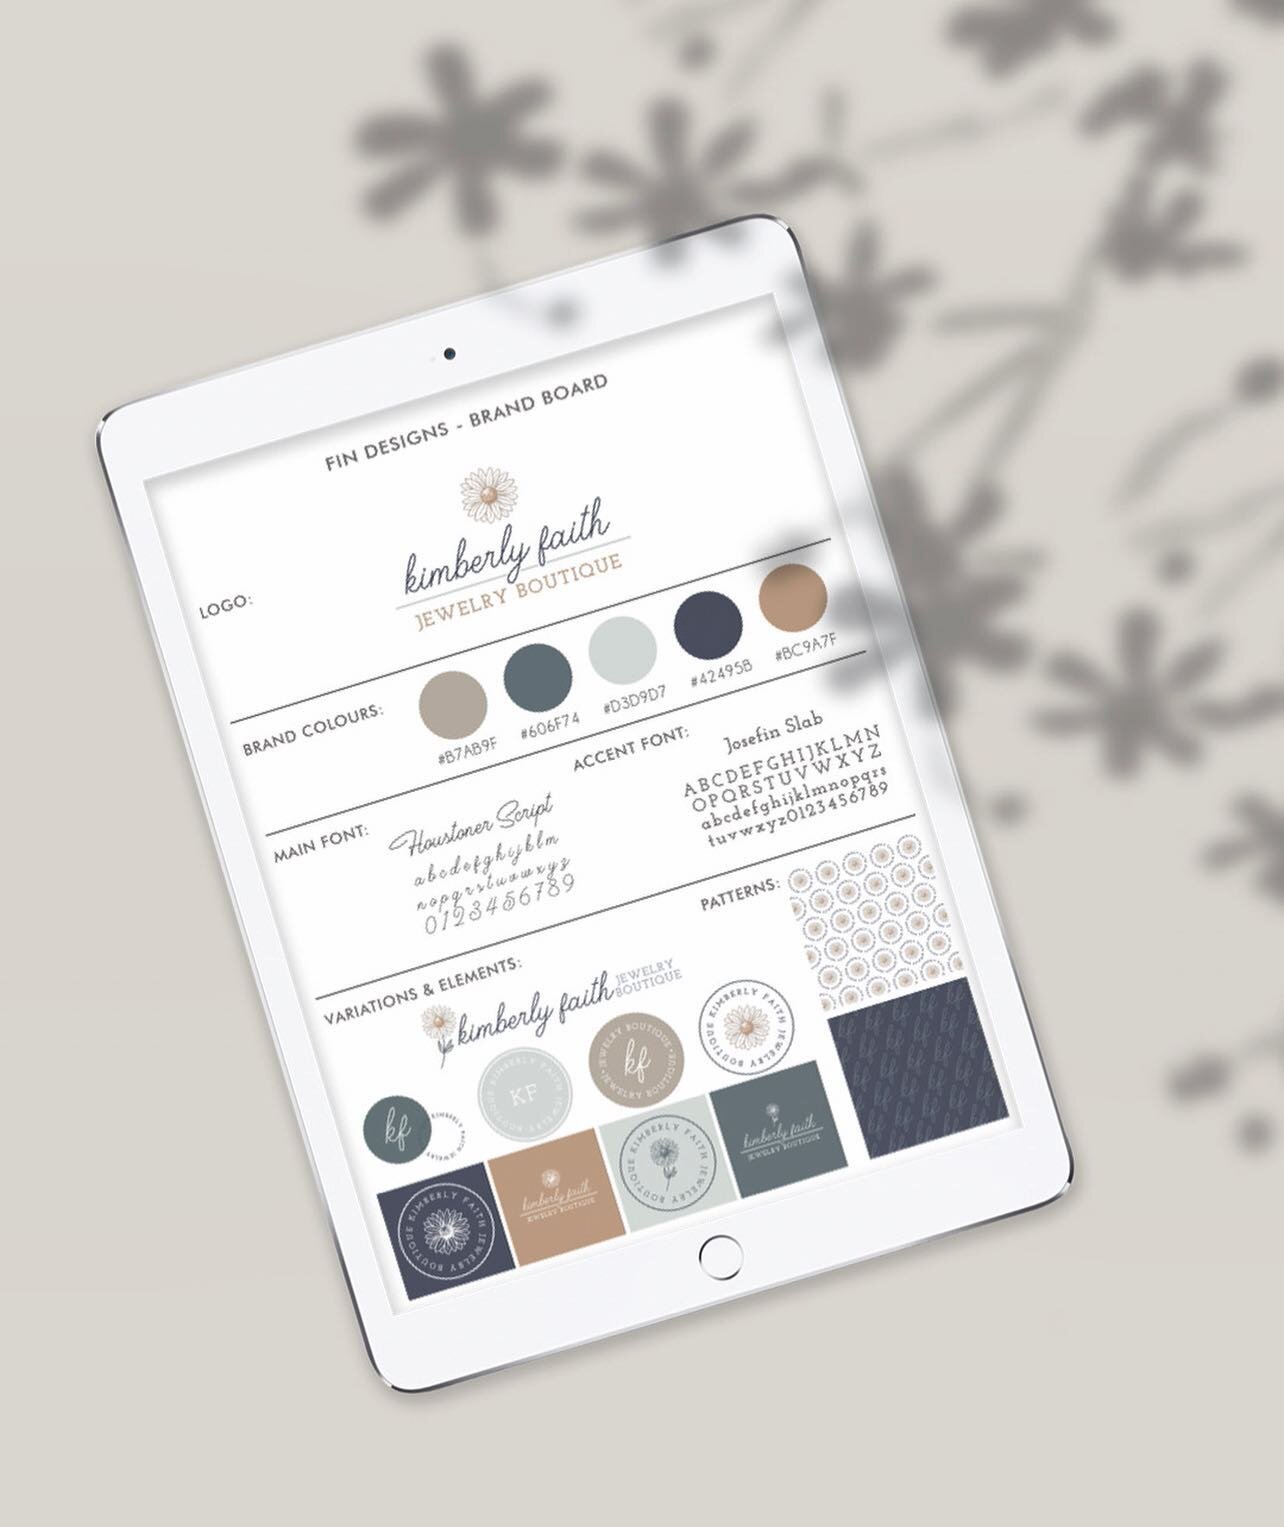 Brand board for @kfjewelryboutique a few months back. Love what Kim has done with her brand package since her rebrand. She took all the elements and really ran with her DIY sale graphics, promos and more! I love to see it. Go check out @kfjewelrybout